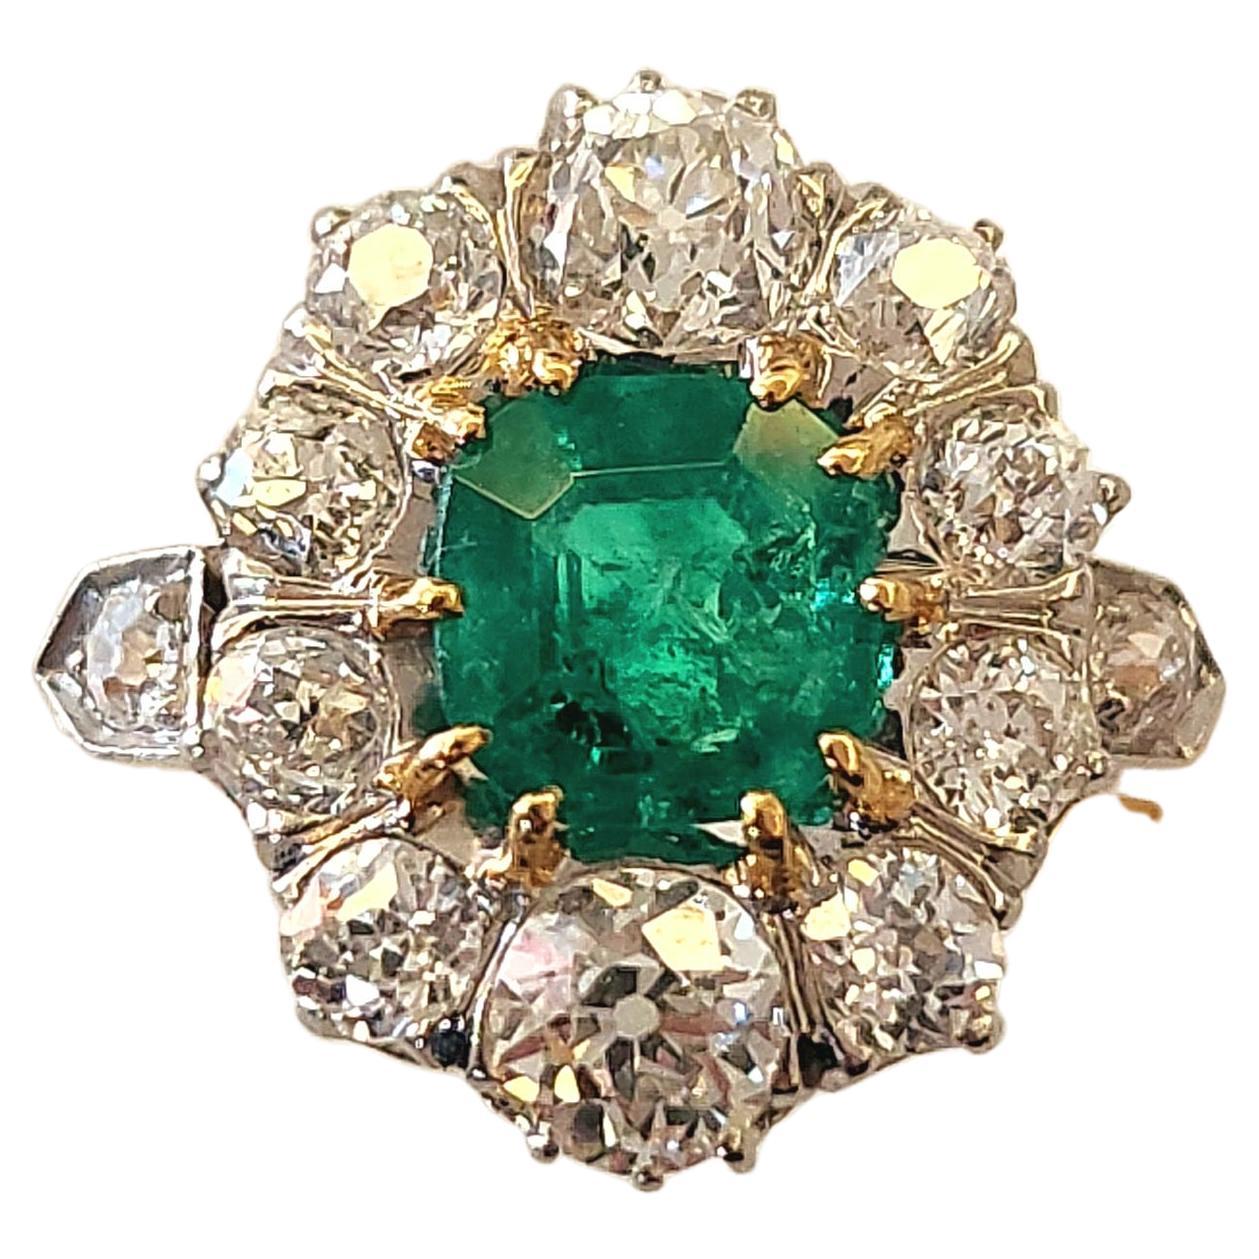 Antique 18k gold french ring centered with natural green colombian emerald with a diameter of 6mm×6.14mm flanked with old mine cut diamonds estimate weight 2.55 ct H colour vs clearity excellent spark  ring is hall marked with french eagle head gold